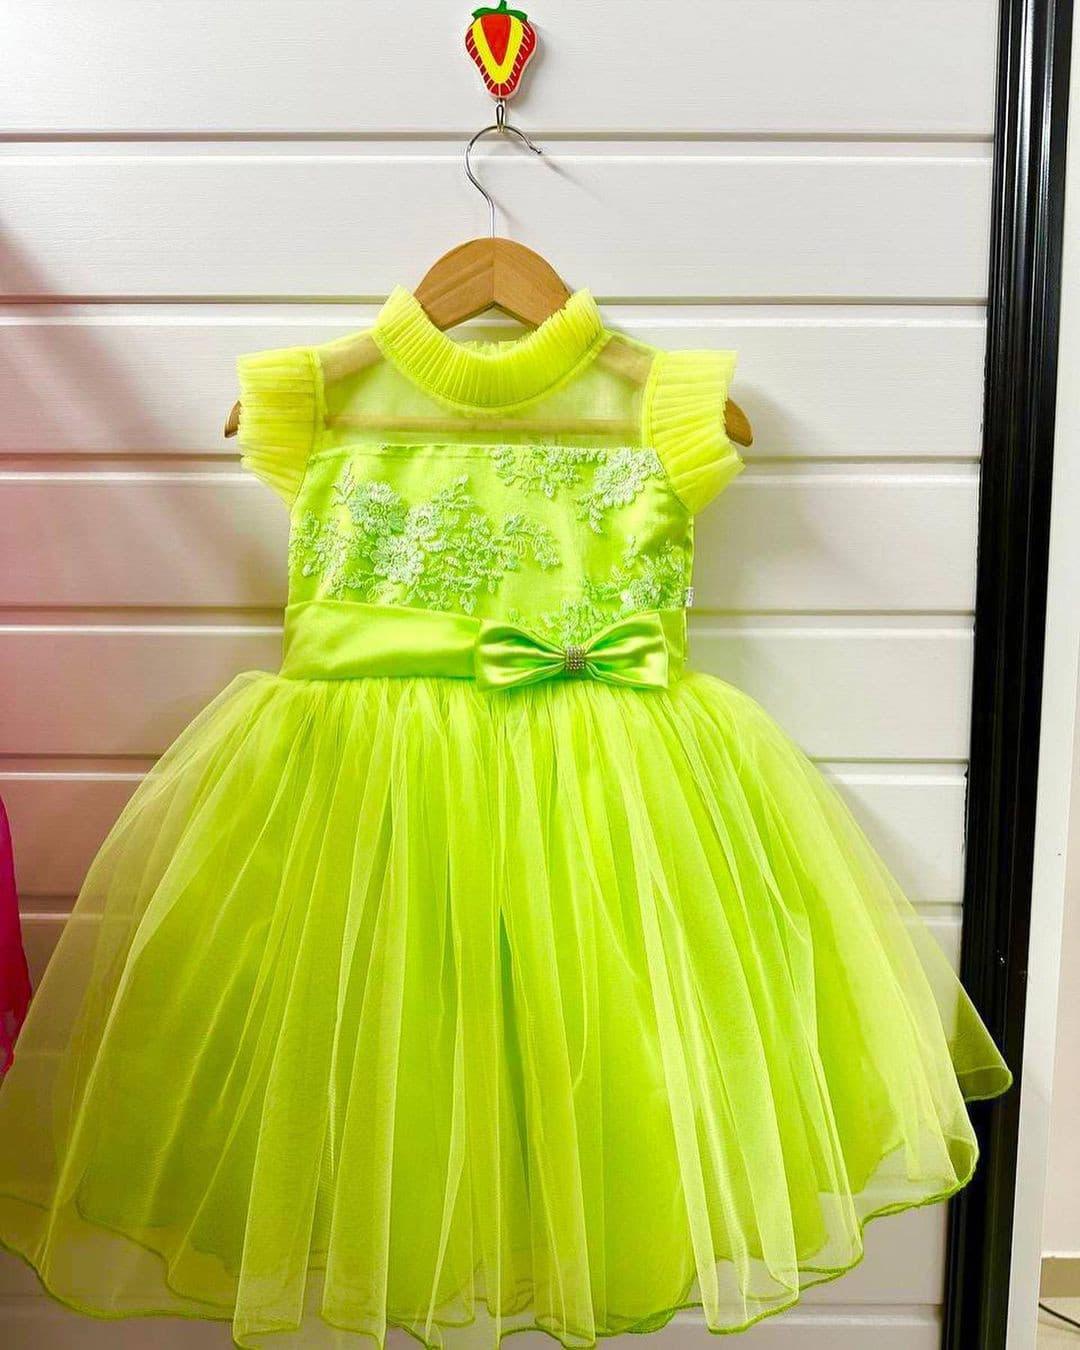 Lime Green Thread Embroidery Knee-length Frock
Material: Lime Green nylon mono net with thread work on yoke side. Inner portion is covered with premium ultra satin and white cotton lining.
Colour:Lime Green| Sle